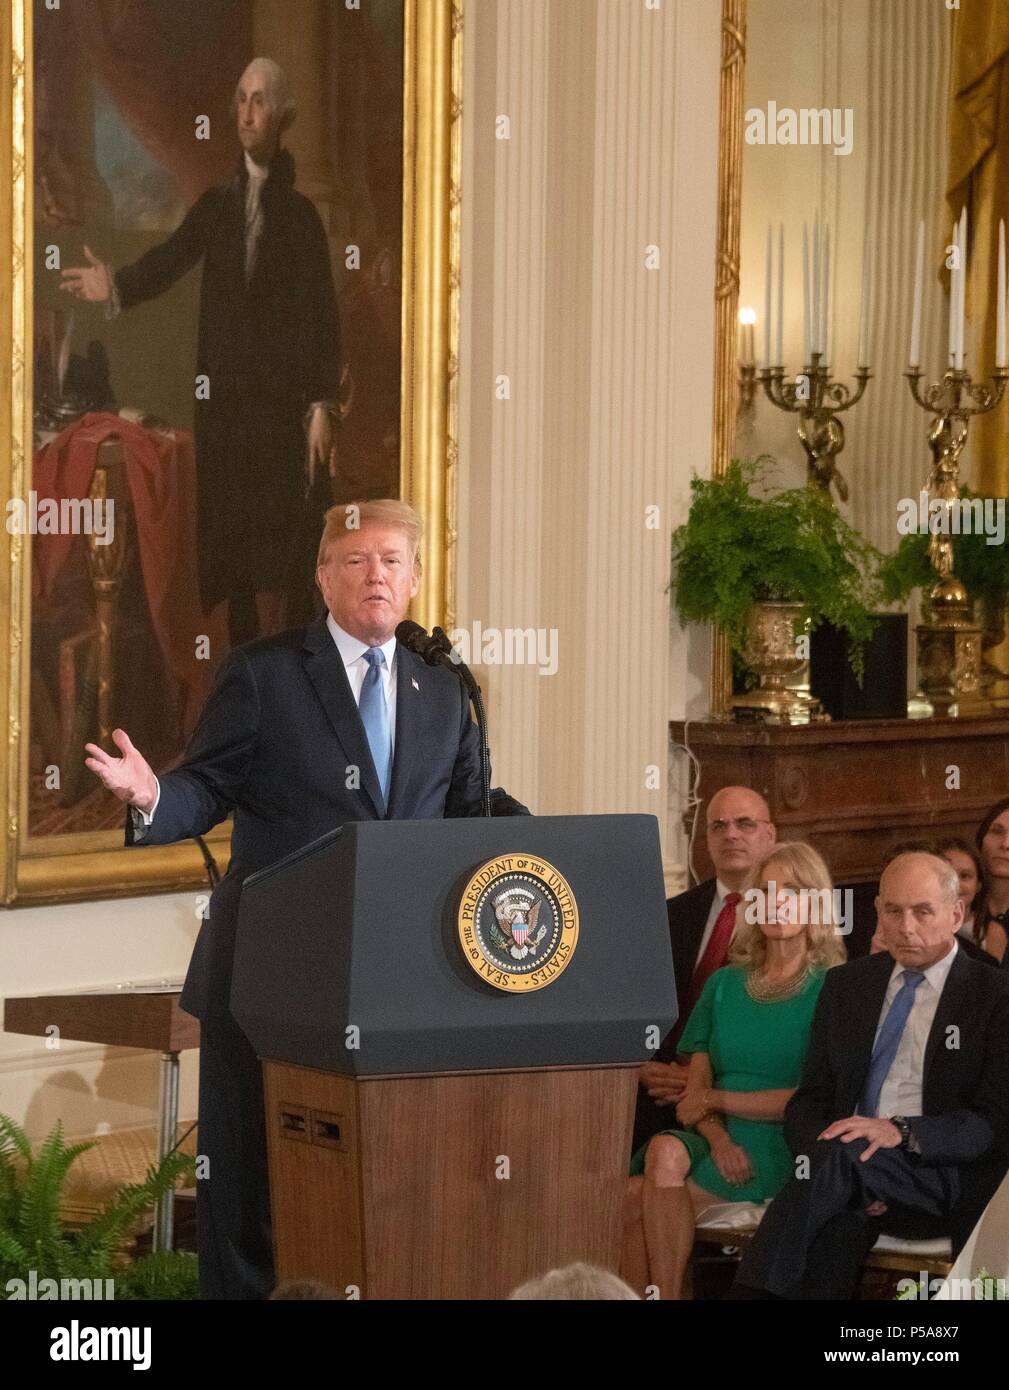 United States President Donald J. Trump makes remarks as he hosts a ceremony to posthumously award the Medal of Honor to then-First Lieutenant Garlin M. Conner, U.S. Army, for conspicuous gallantry during World War II in the East Room of the White House in Washington, DC on Tuesday, June 26, 2018. Conner is being honored for his actions on January 24,1945, while serving as an intelligence officer with Headquarters and Headquarters Company, 3d Battalion, 7th Infantry Regiment, 3d Infantry Division. Credit: Ron Sachs/CNP | usage worldwide Stock Photo